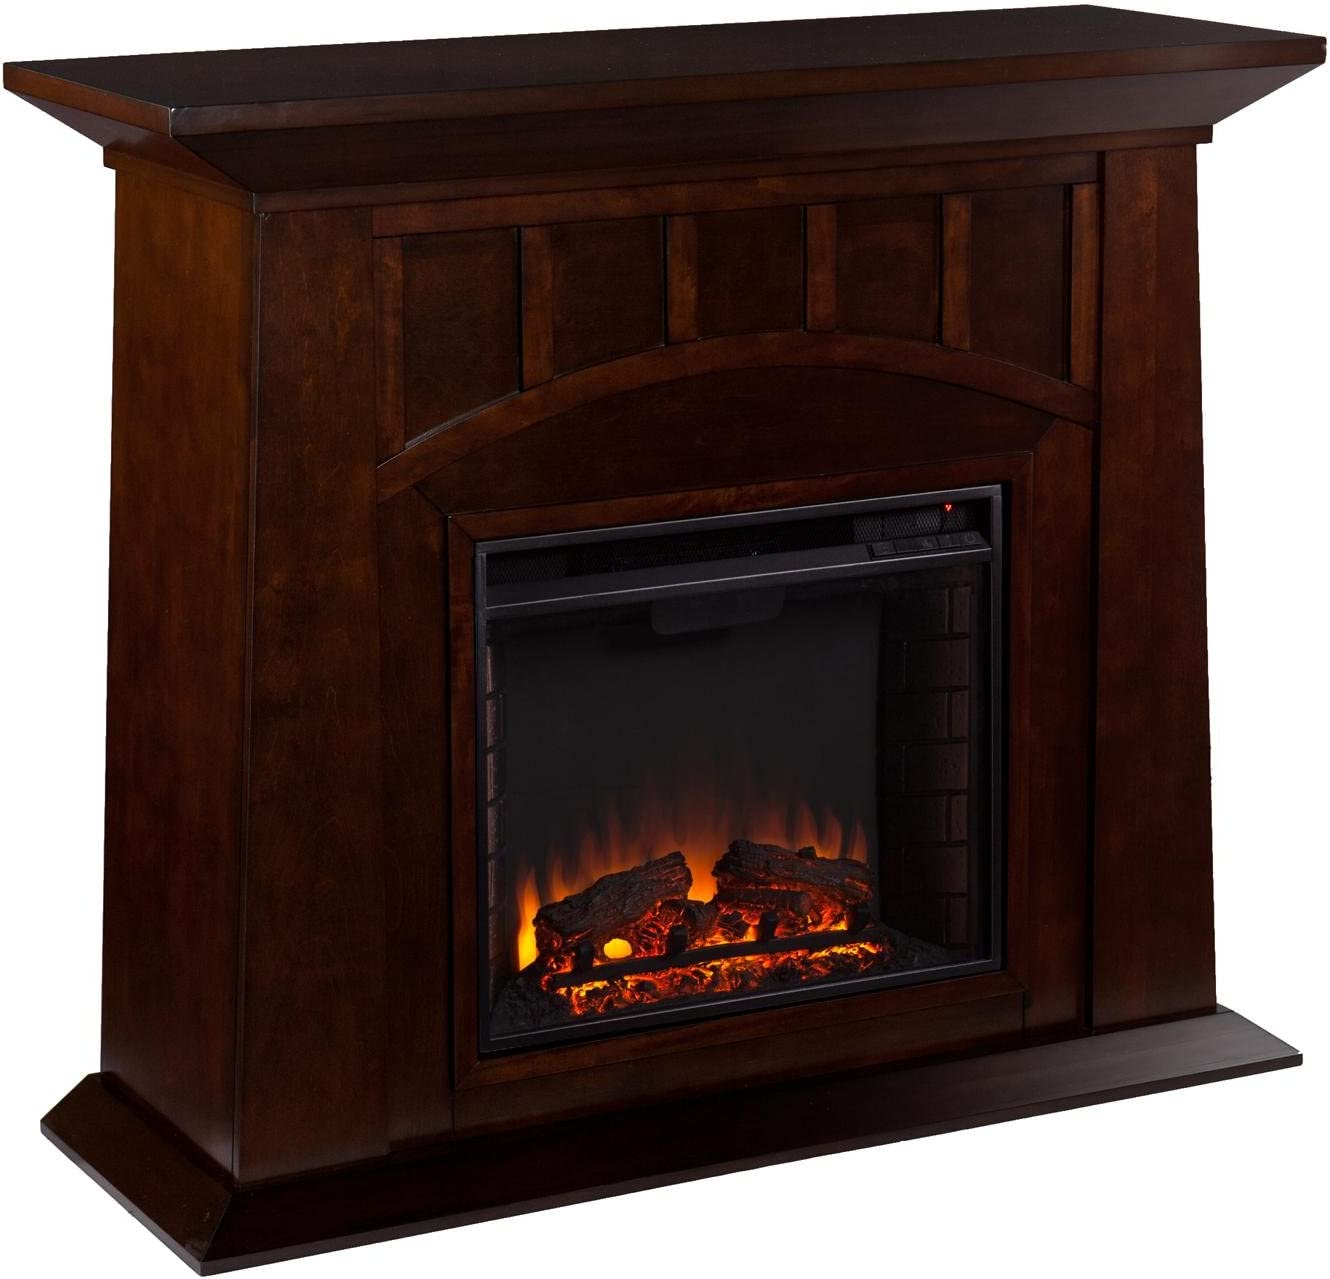 Southern Enterprises Lowery Electric Fireplace in Espresso